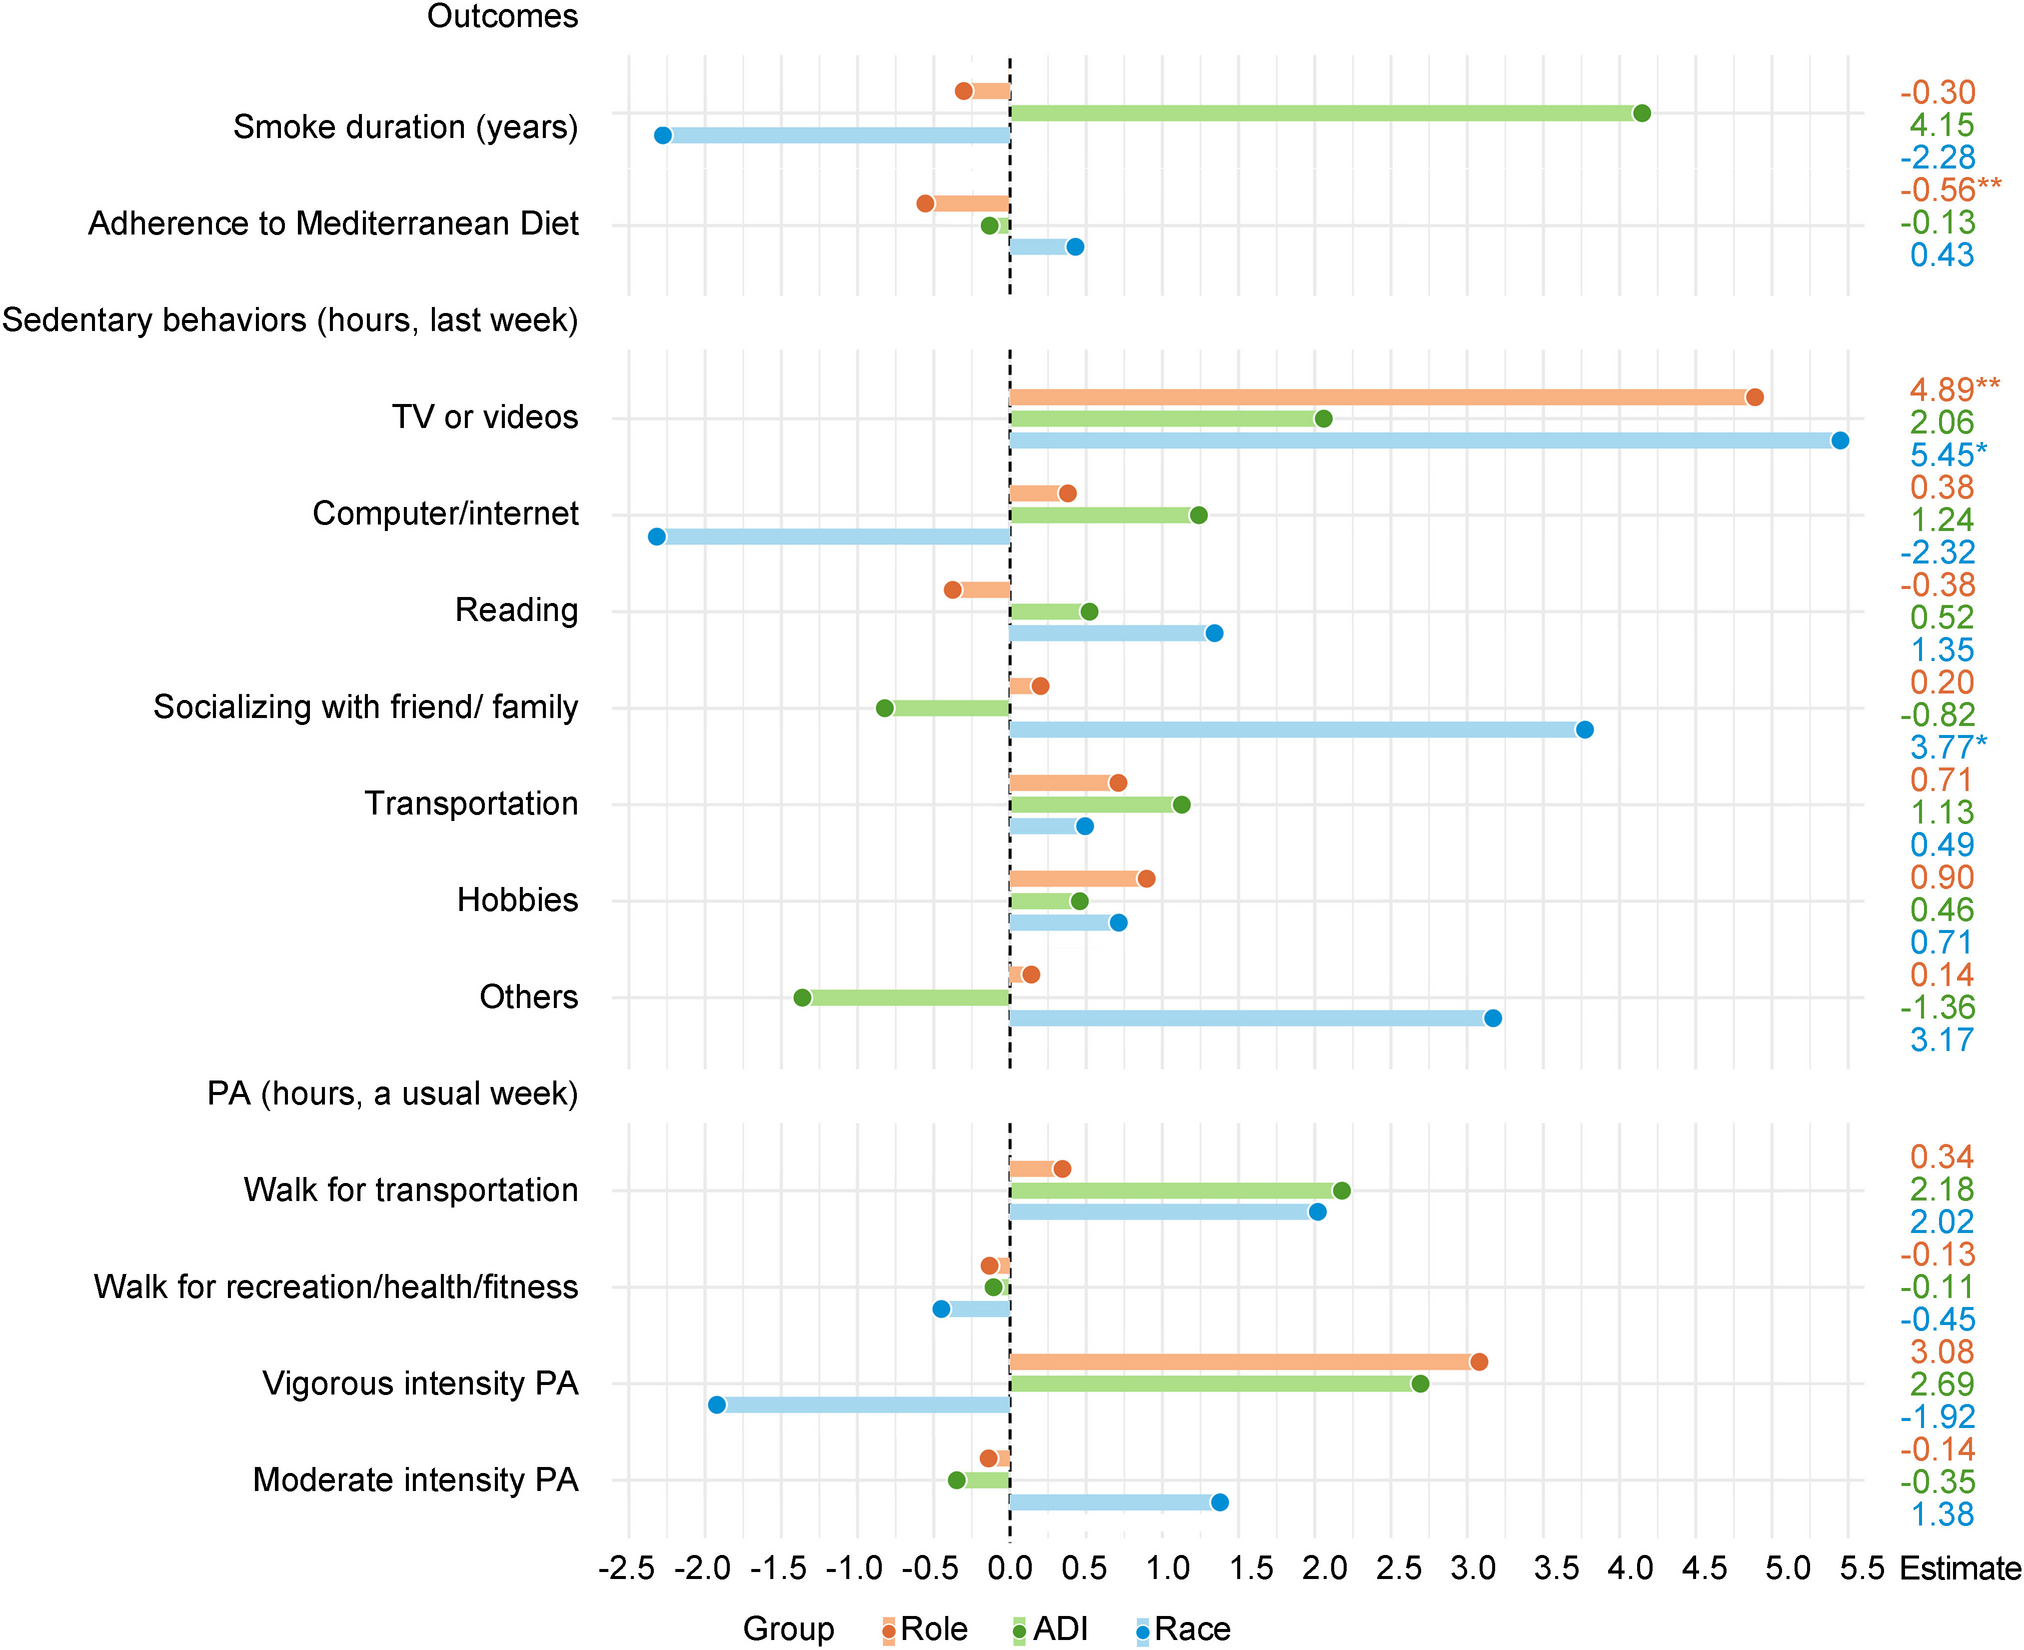 Associations of role, area deprivation index, and race with health behaviors and body mass index among localized prostate cancer patients and their partners